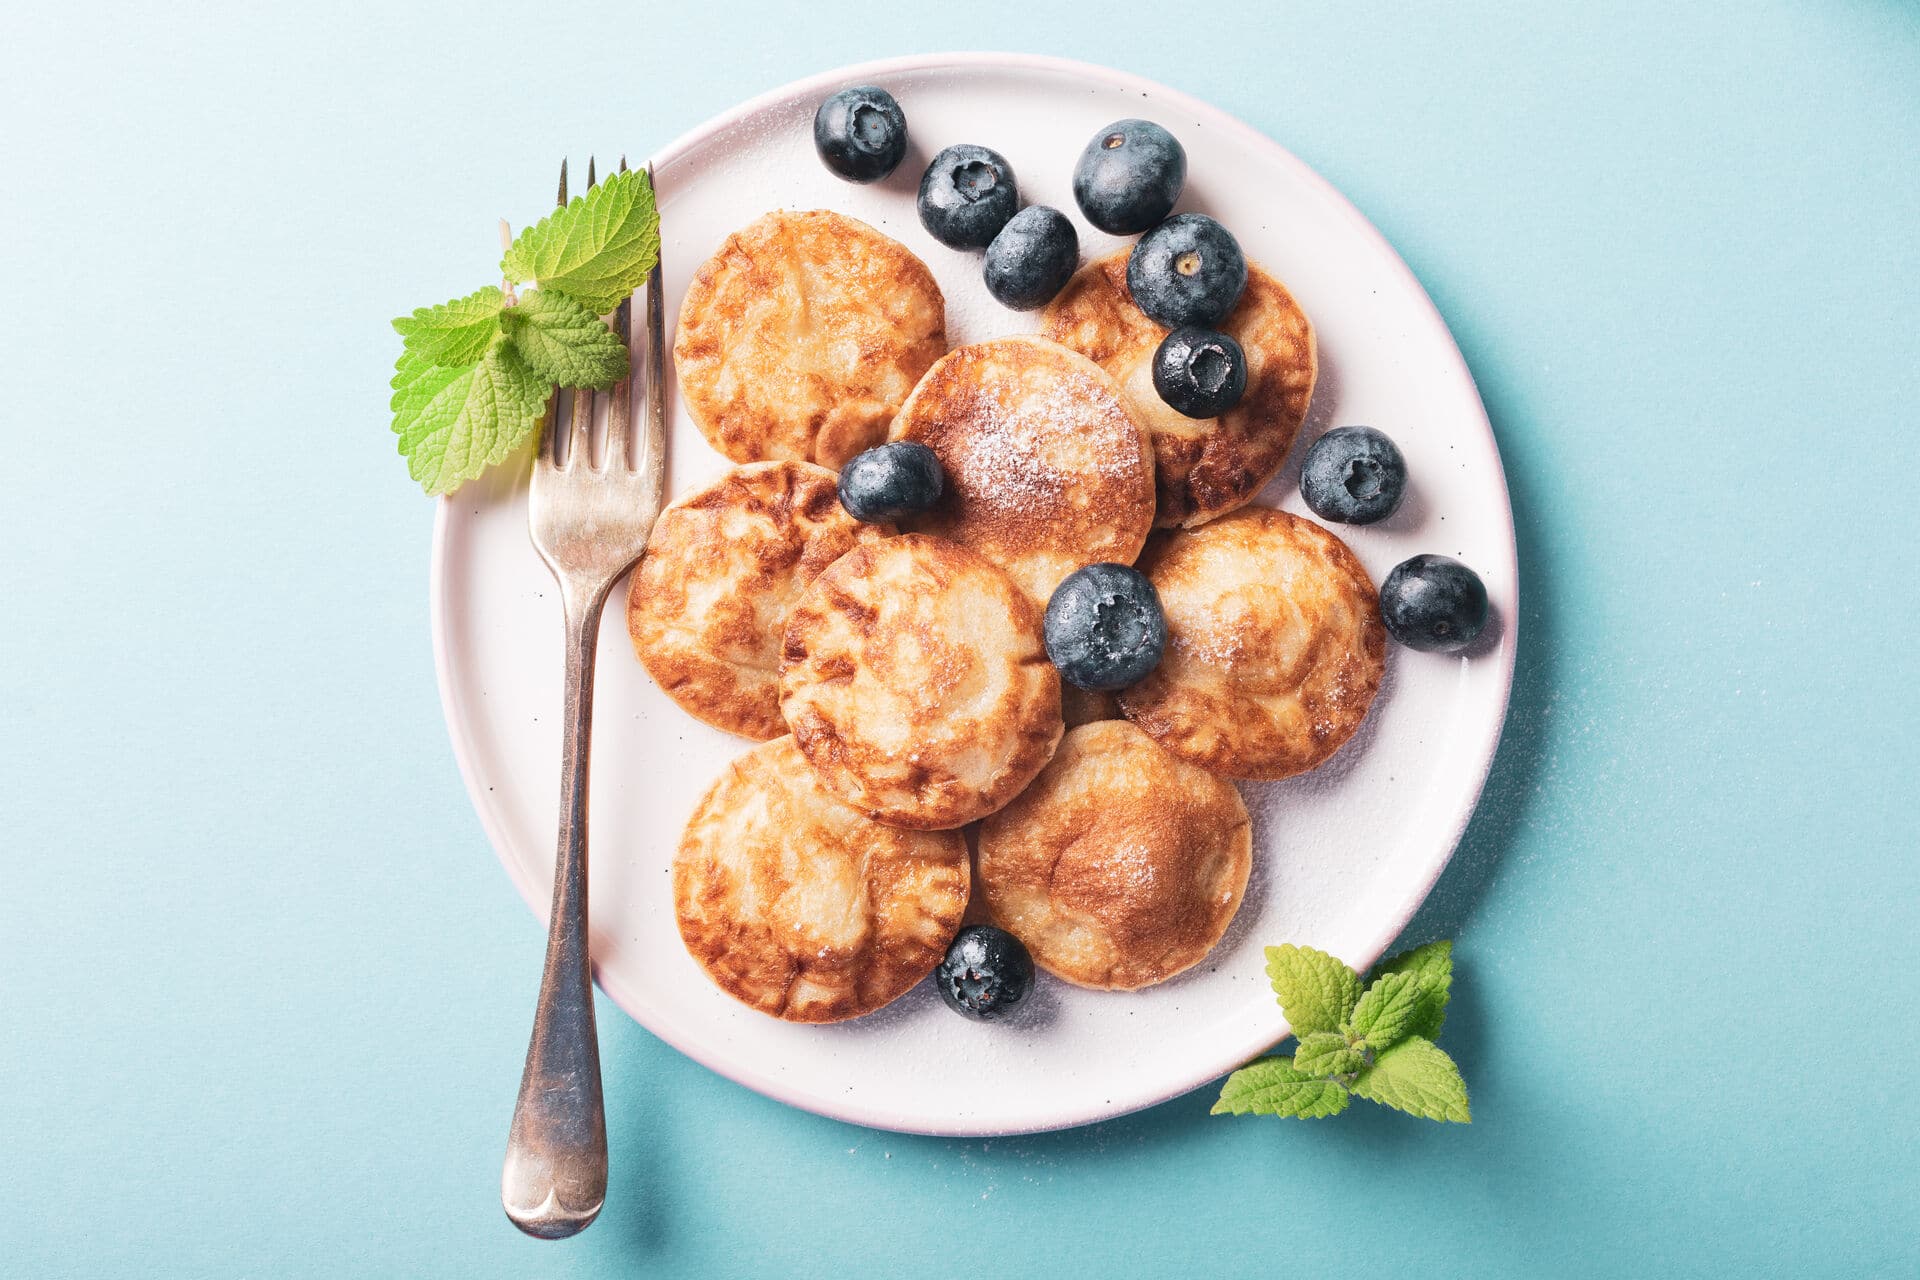 Overhead shoot of dutch mini pancakes called poffertjes with blueberries, sprinkled with powdered sugar. Healthy food concept with copy space.